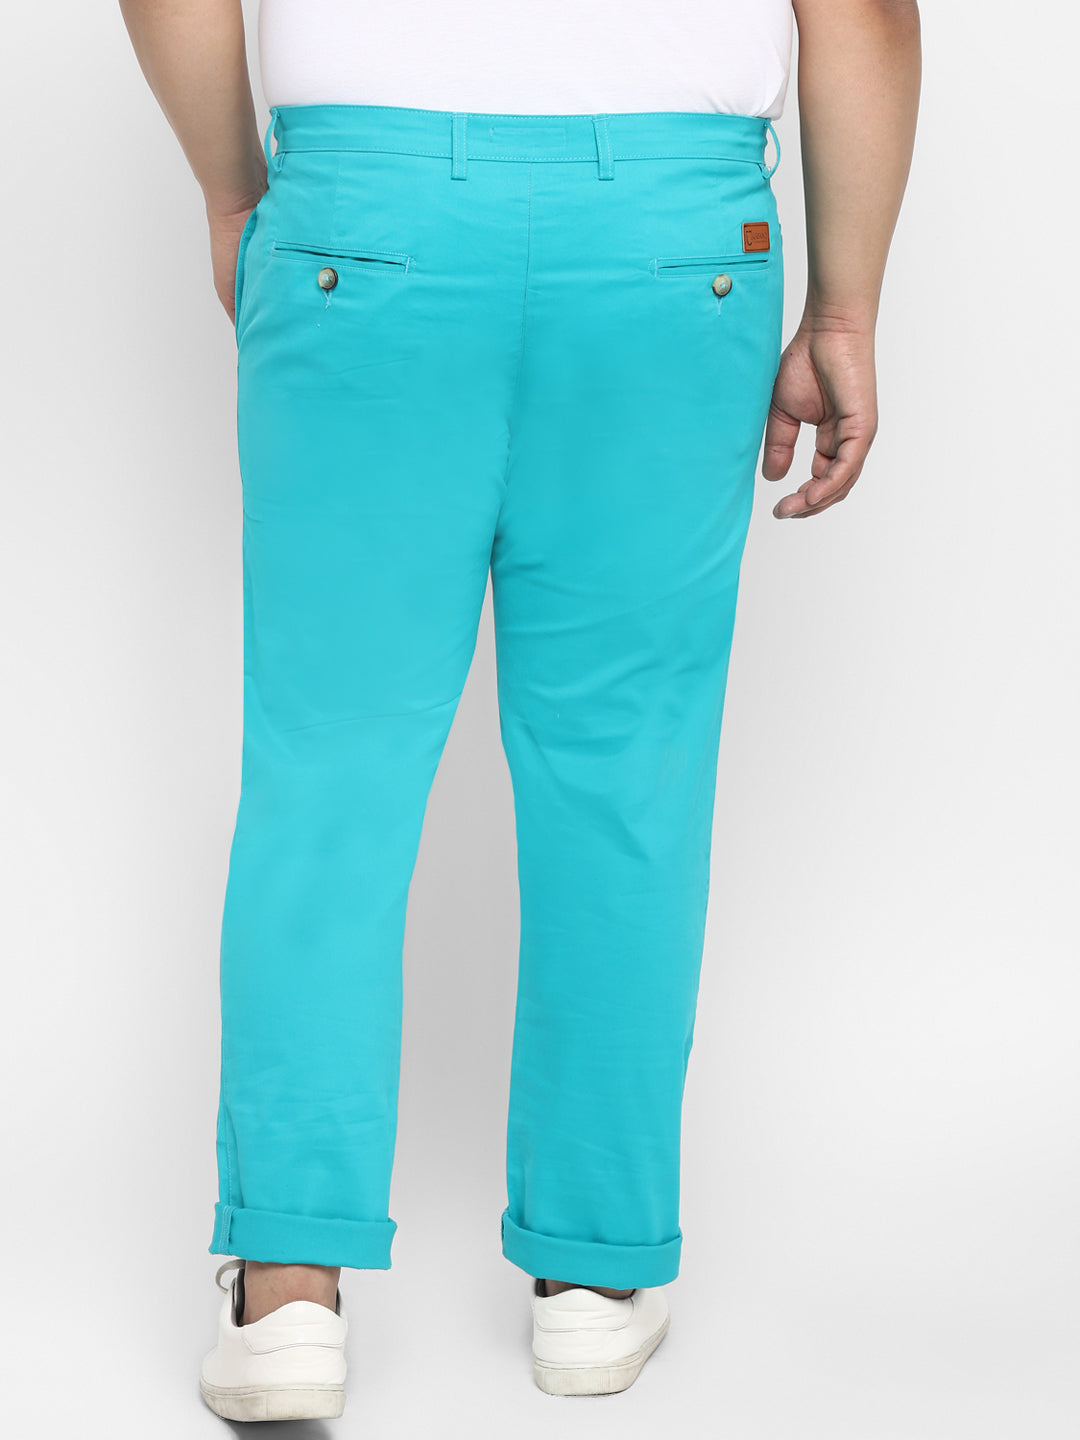 Plus Men's Turquoise Blue Cotton Regular Fit Casual Chinos Trousers Stretch